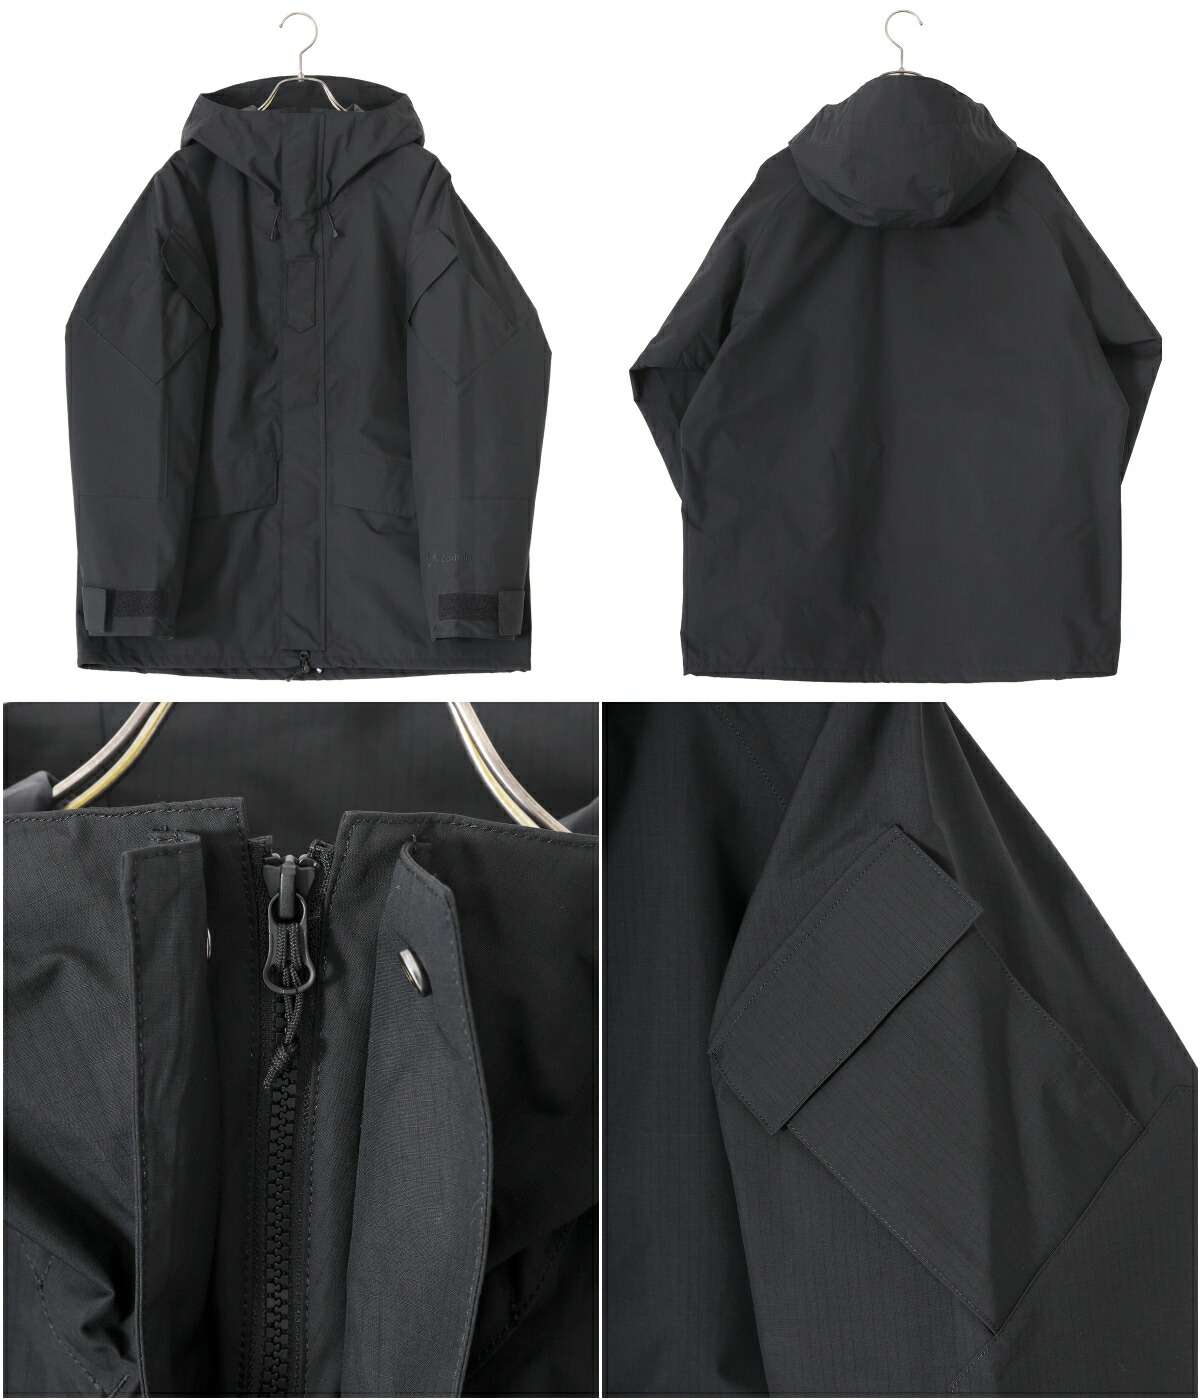 GOLDWIN / ゴールドウィン ： 【ONLY ARK】別注 Hooded Snow Jacket 